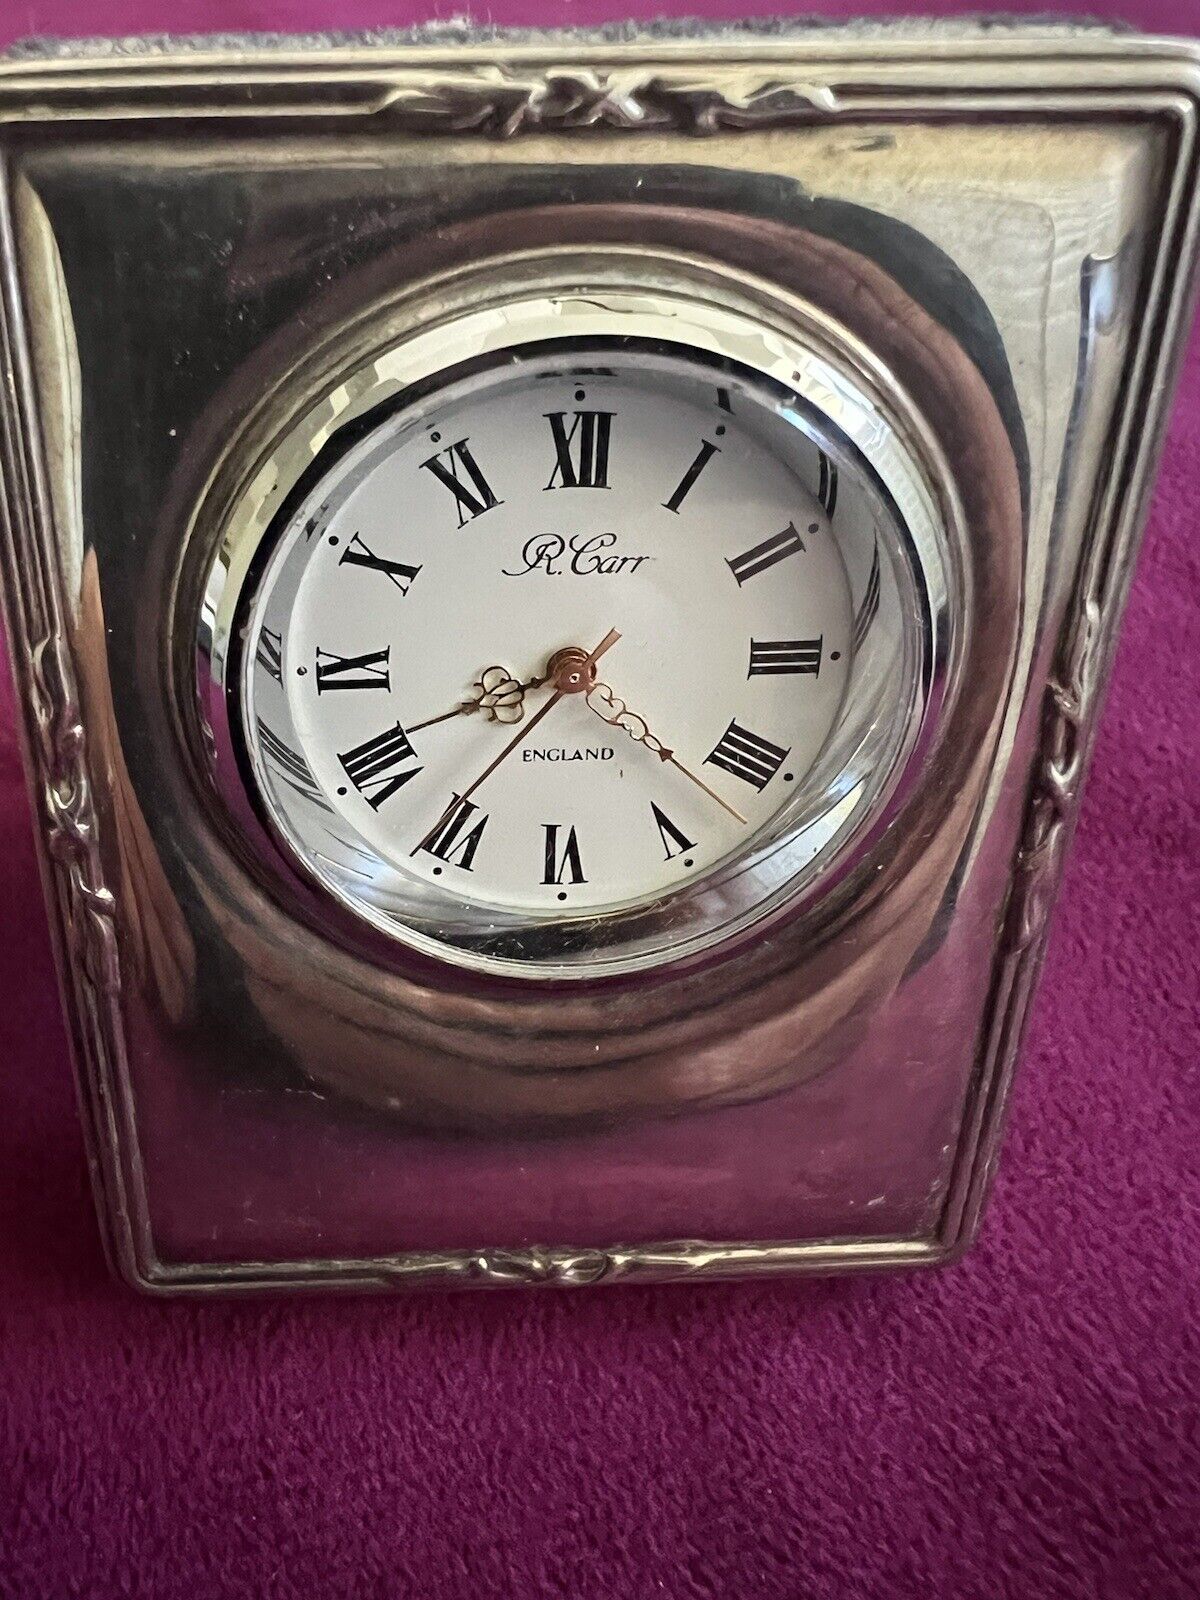 Carrs sterling silver mini clock - R. Carr England